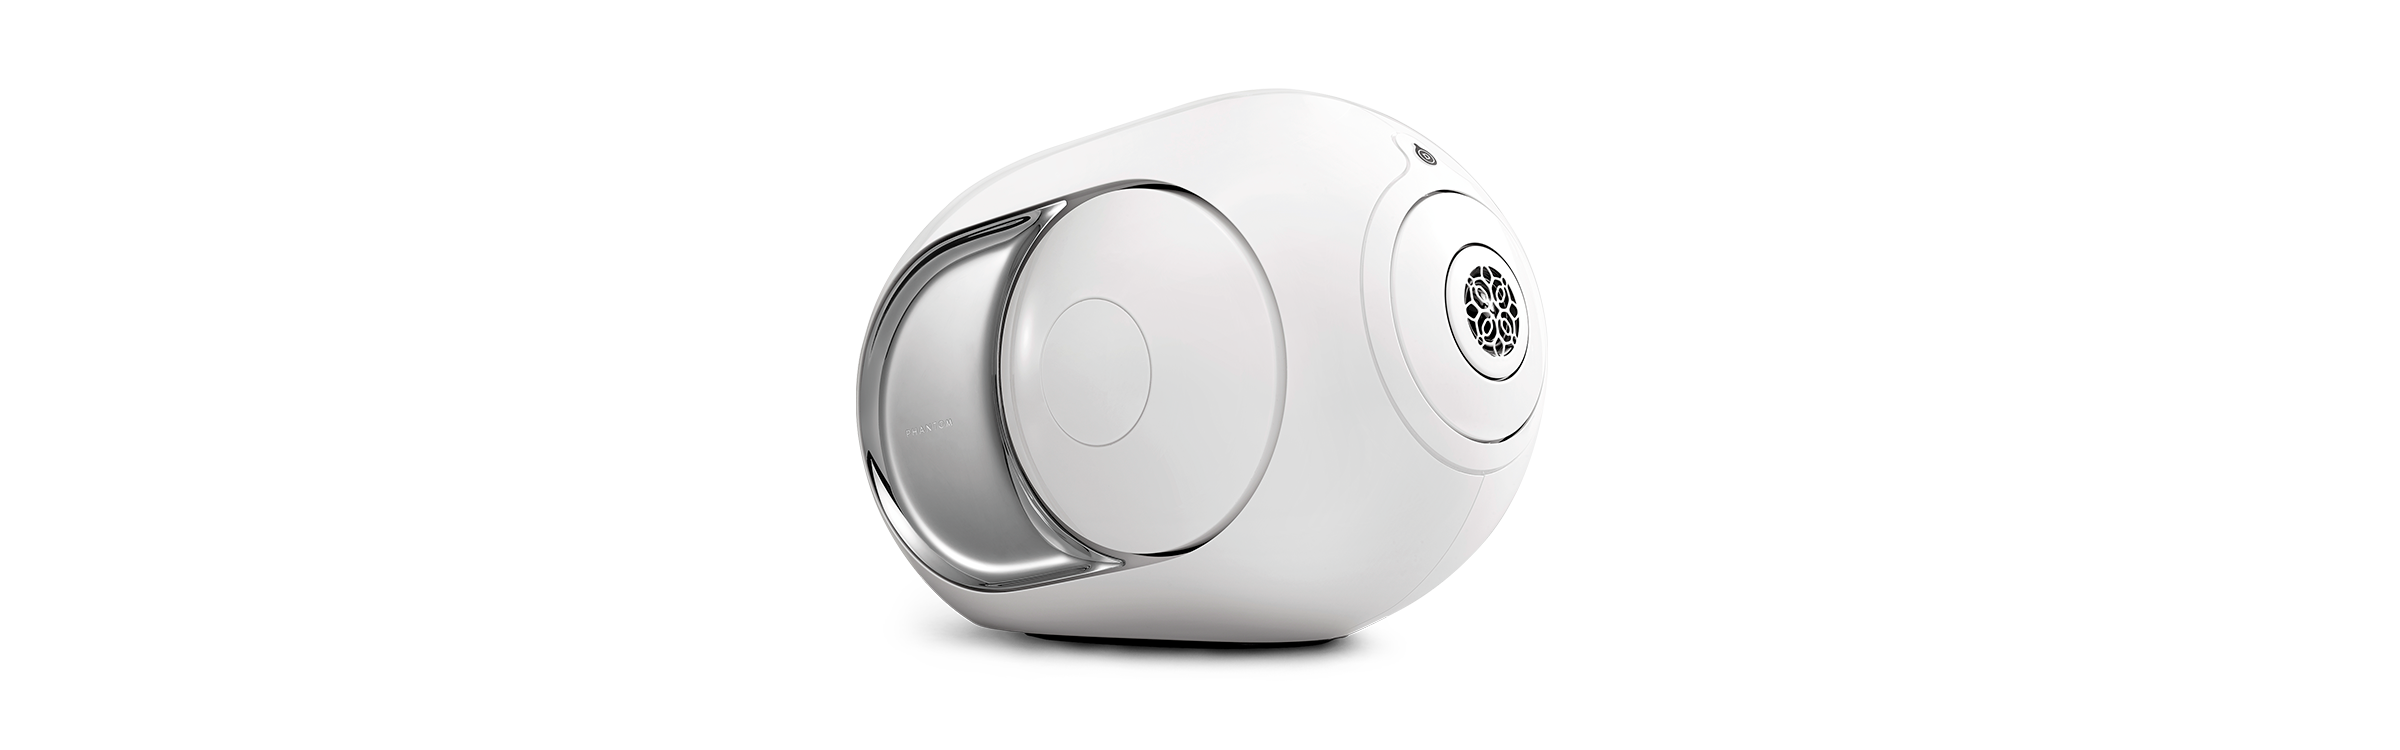 devialet second hand